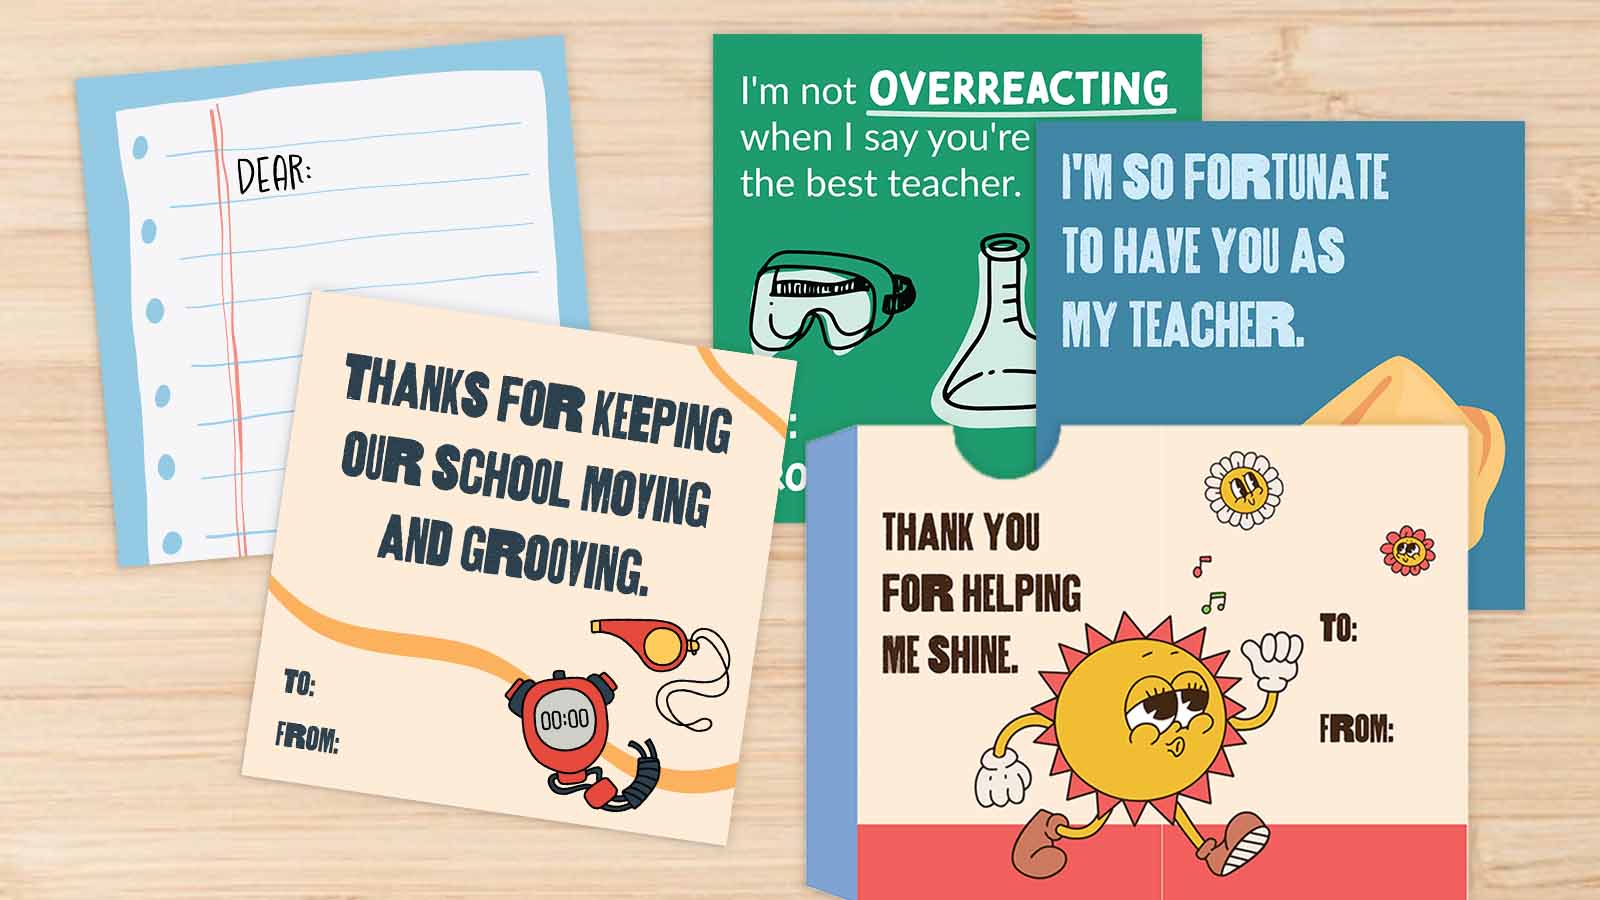 Examples of free printable teacher thank you cards.